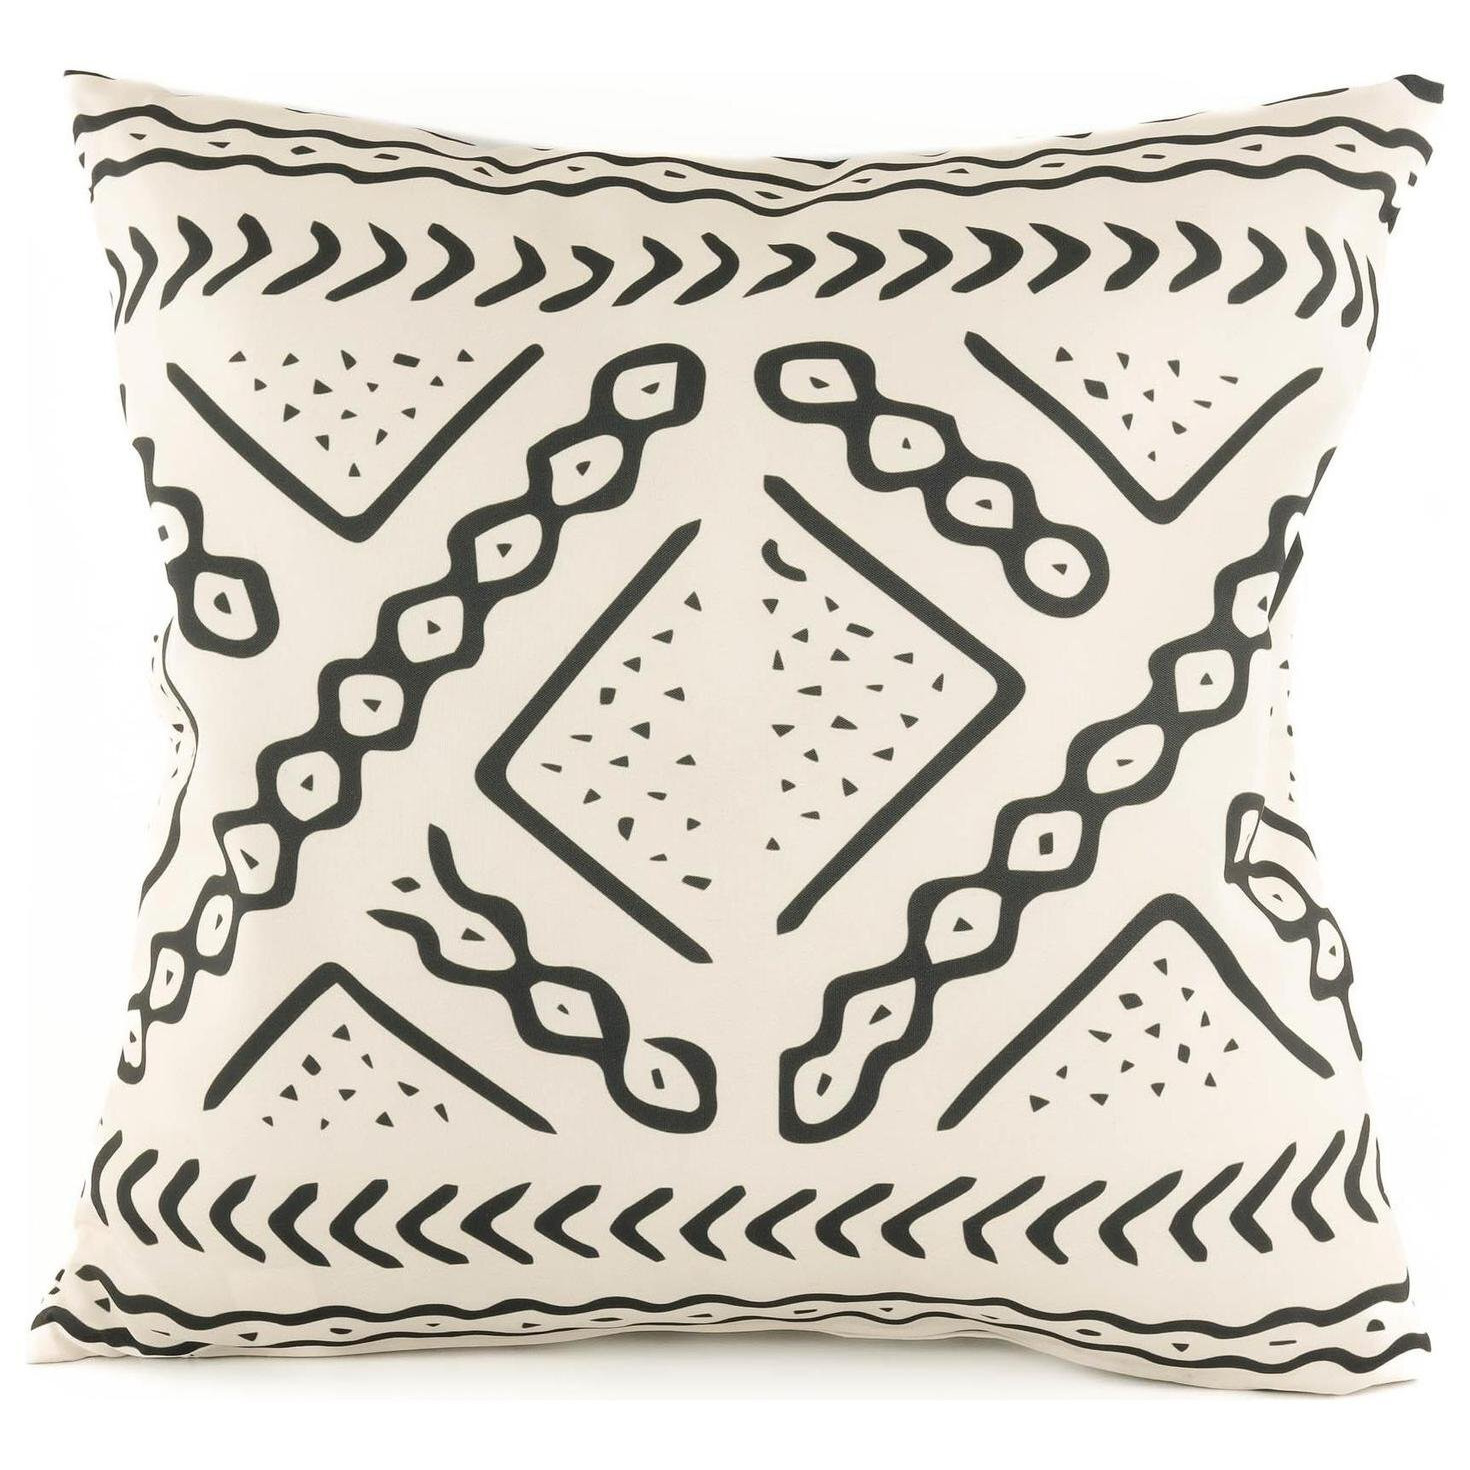 Streetwize Aztec Tribal Printed Outdoor Cushion - Pack of 4 - image 1